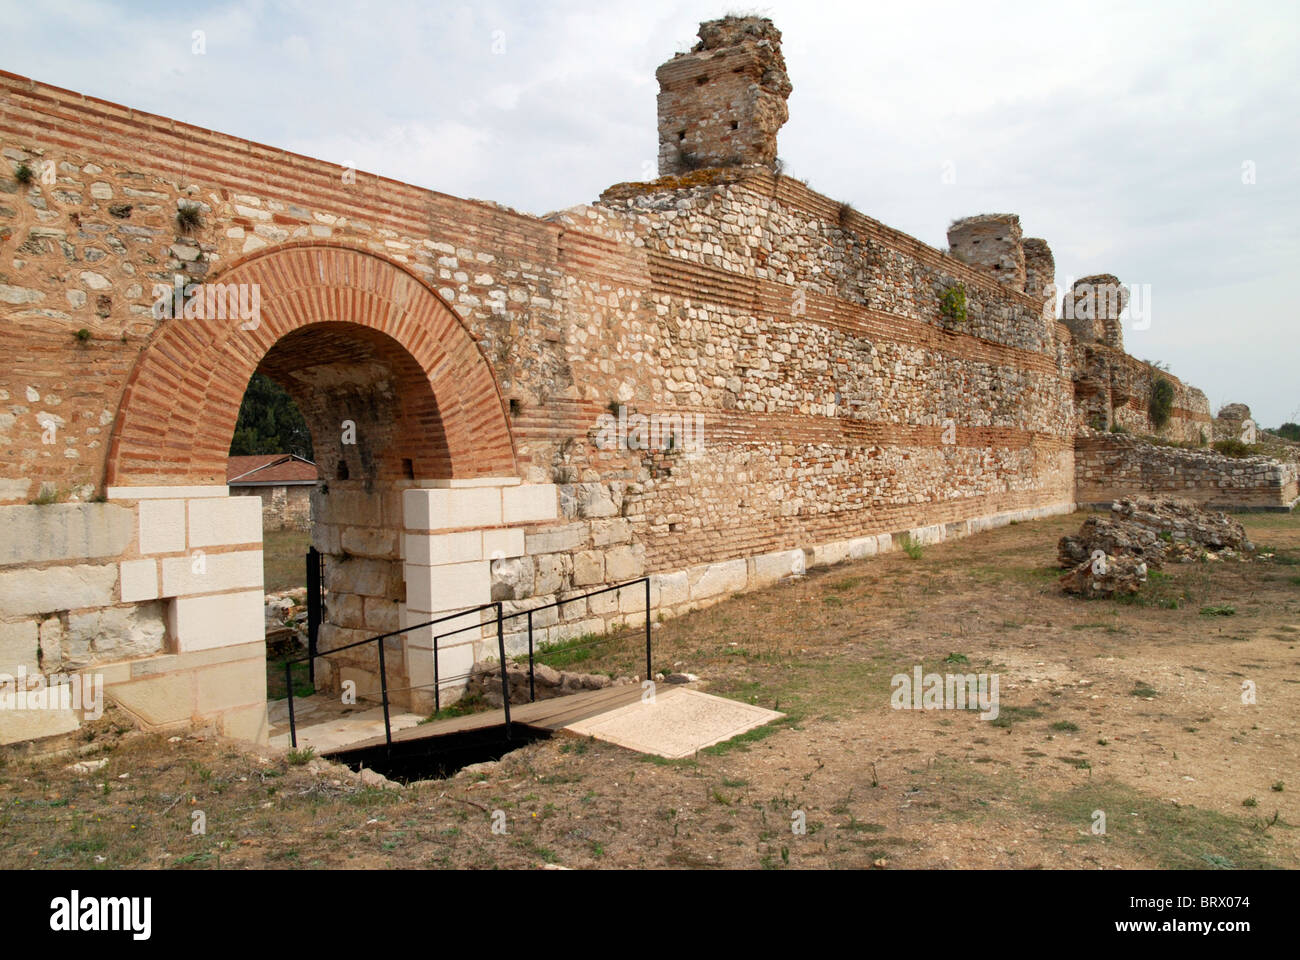 Walls at Nicopolis, City founded by Octavian, Augustus Caesar, after his victory over Anthony and Cleopatra at Actium. Stock Photo